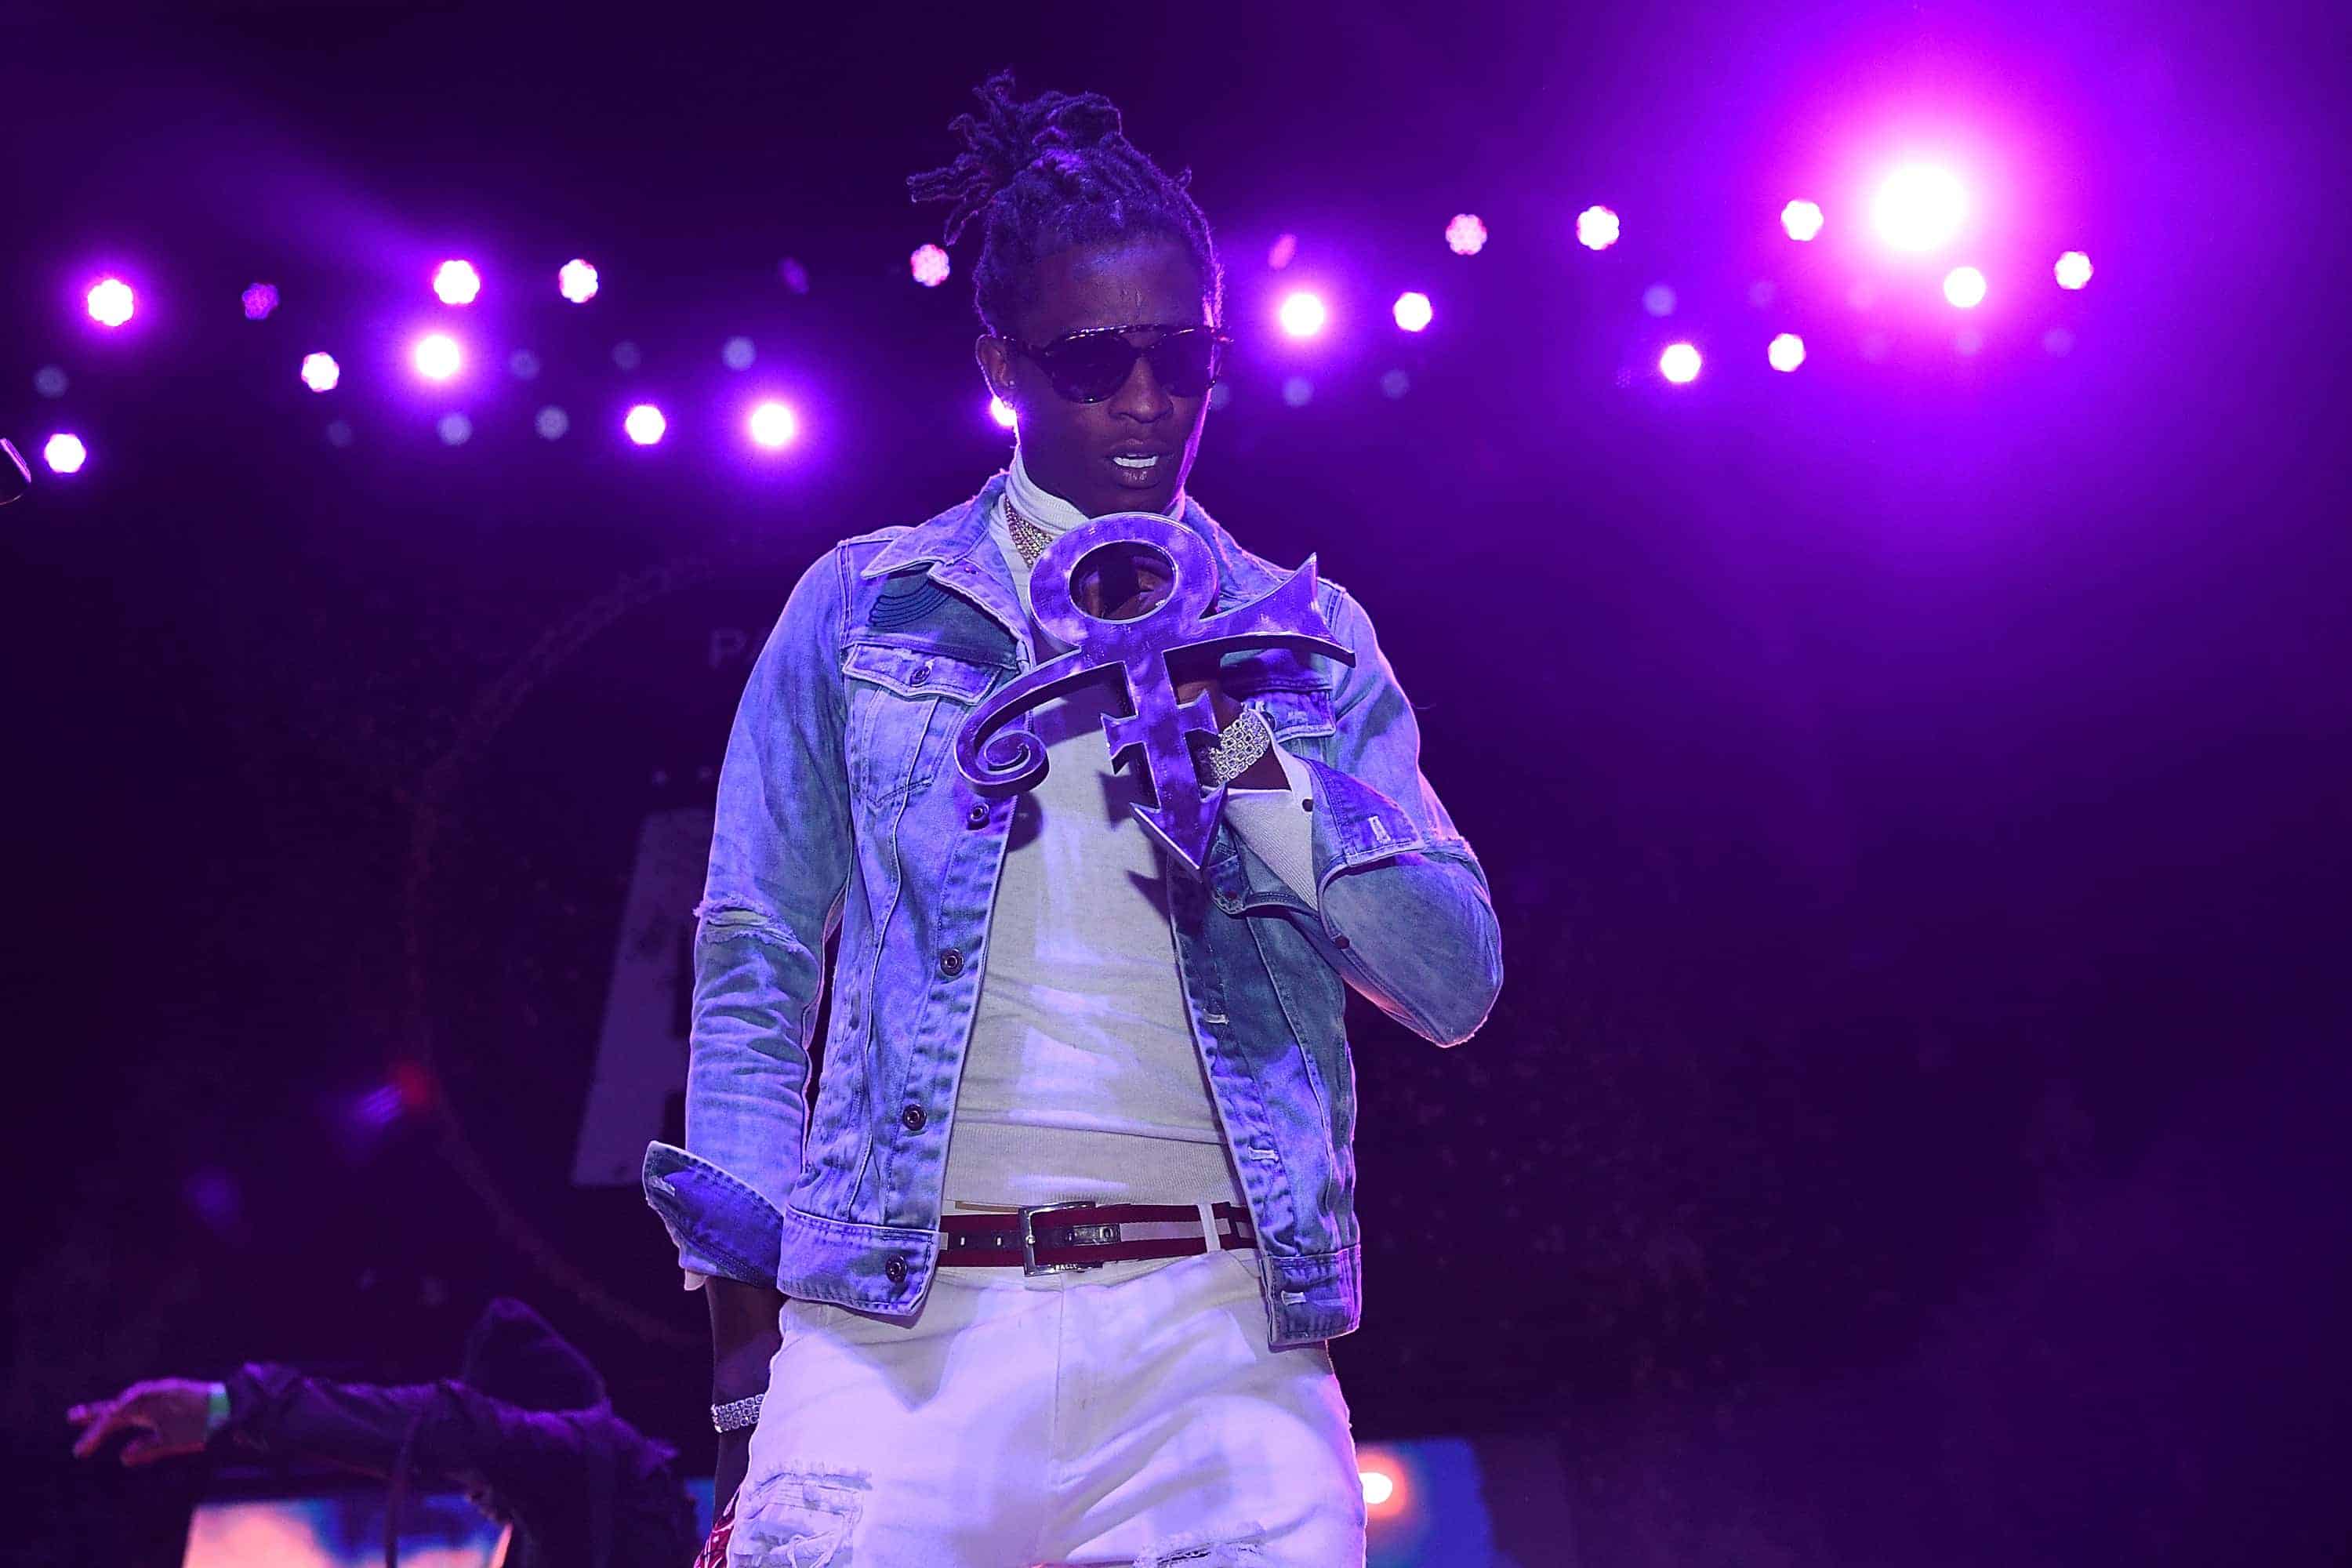 Singer Akbar V Speaks Out About Being Slapped By Young Thug After